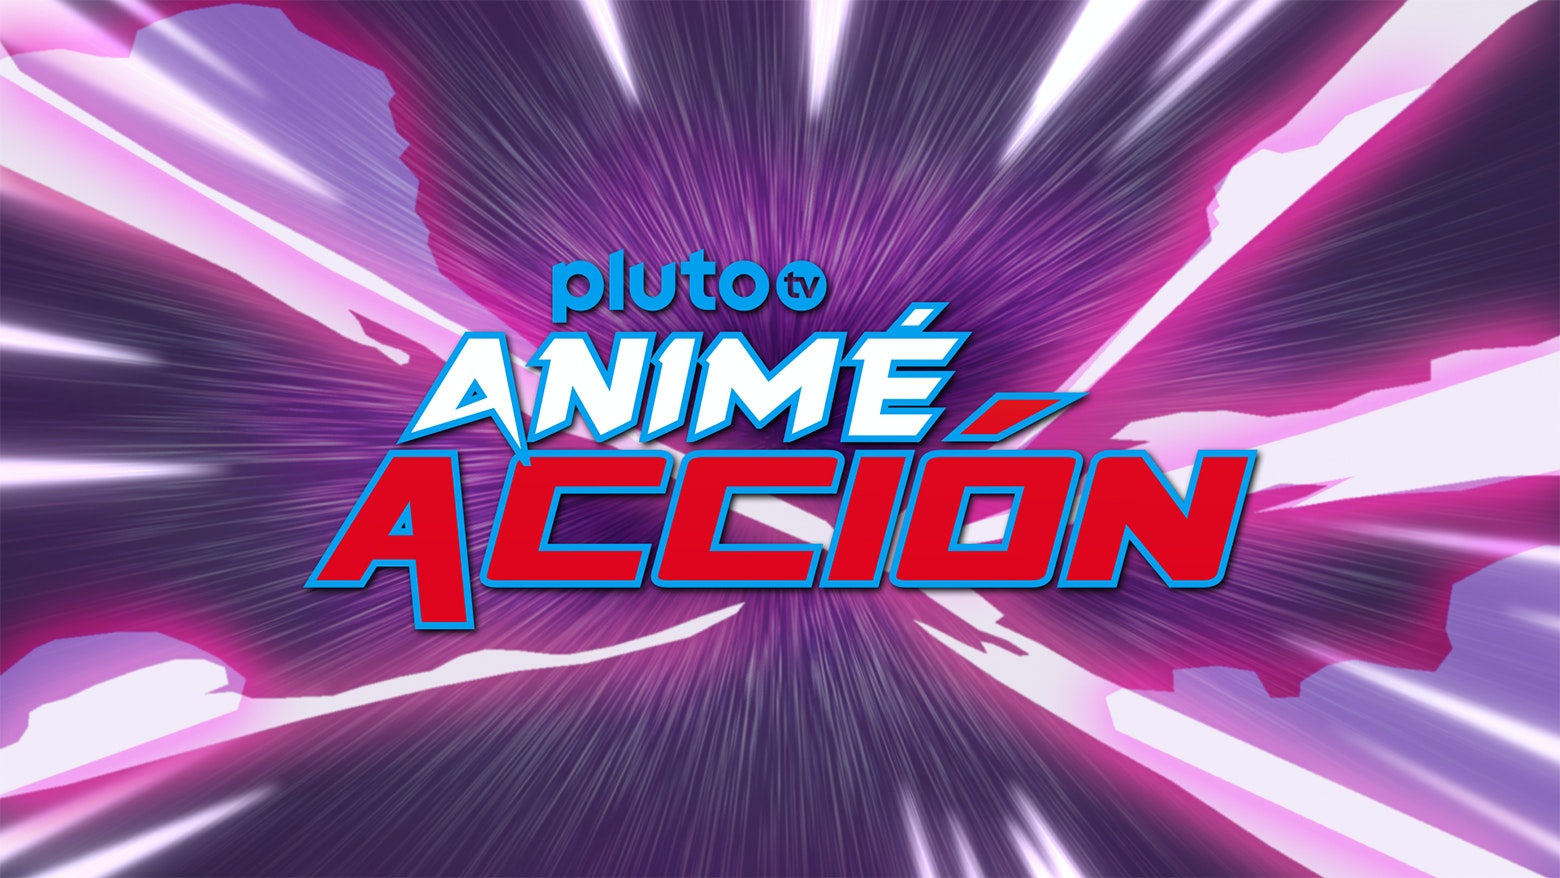 Pluto TV  Watch Anime All Ages CH 323 featuring anime fun for everyone  on series like YuGiOh Digimon Gaiking and more httpplutotvtv animeallages  Facebook